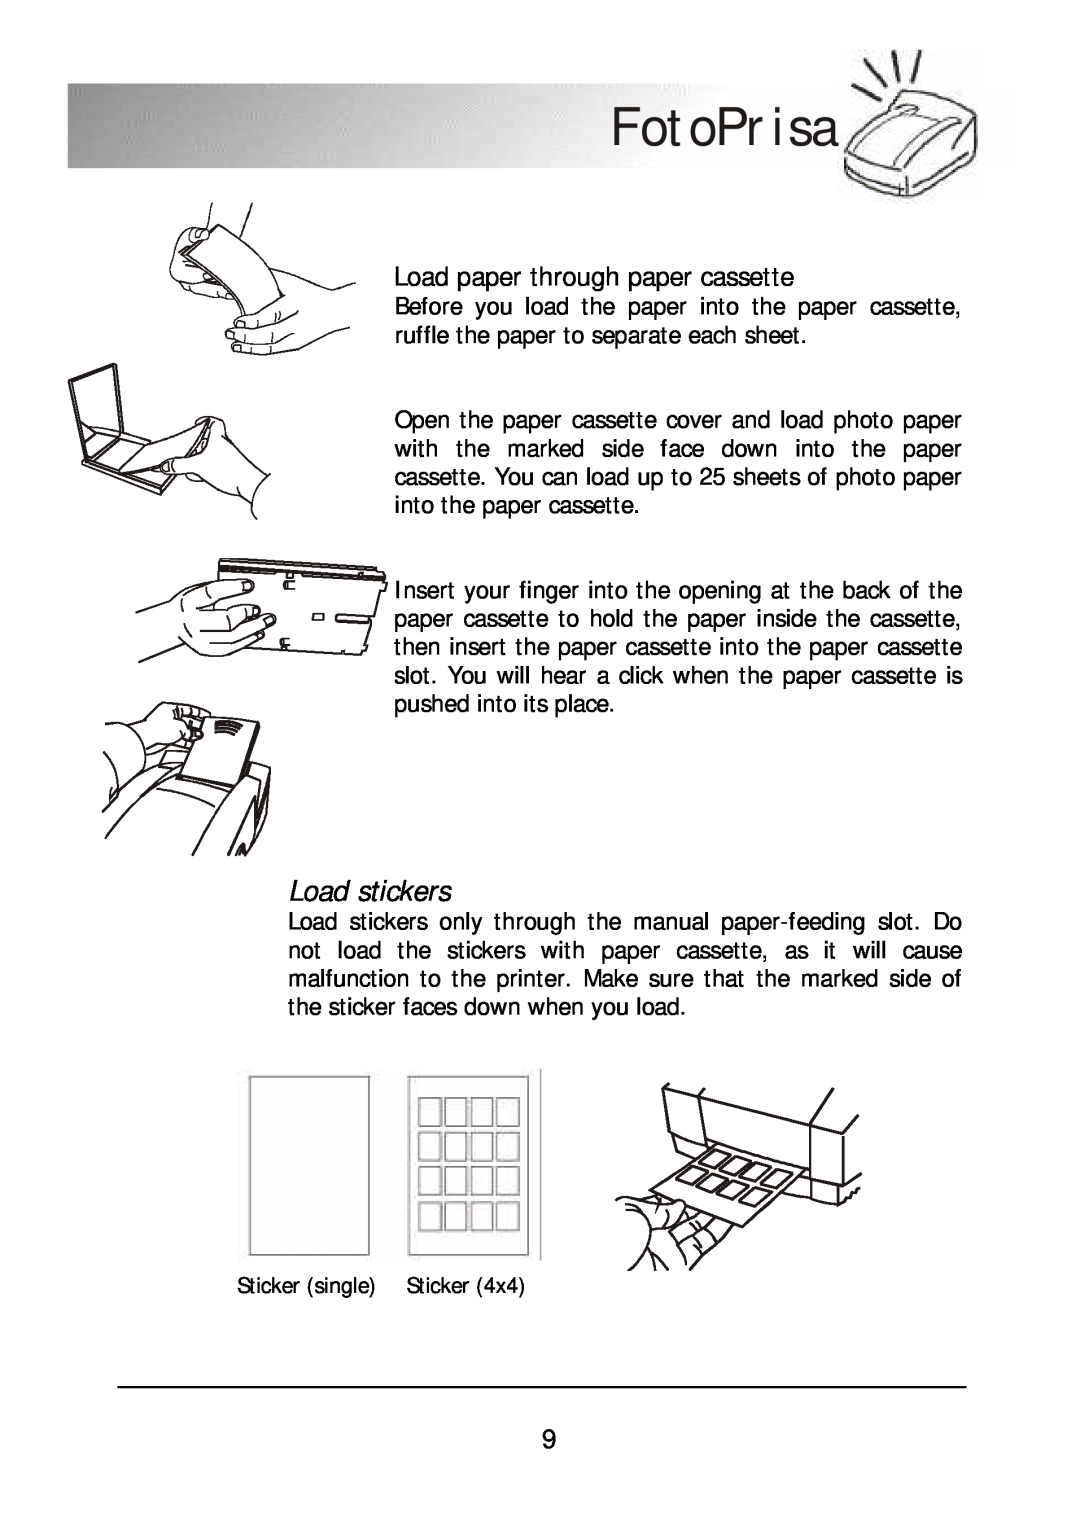 Acer 300P user manual Load stickers, Load paper through paper cassette, FotoPrisa 